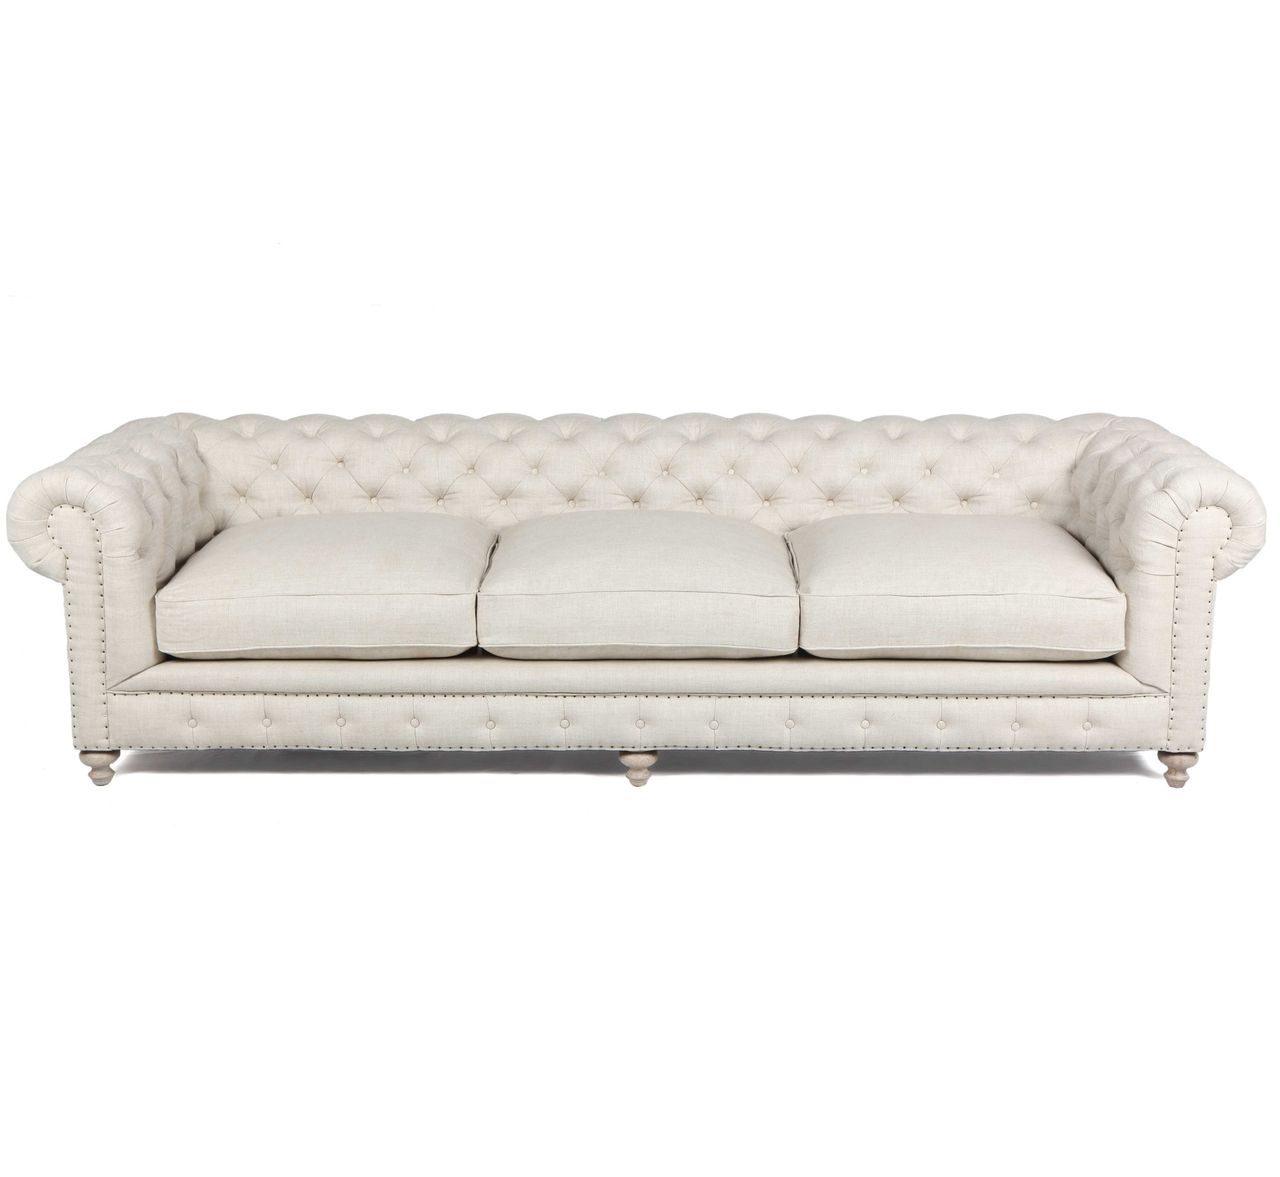 Chesterfield, Chesterfield In 2018 Tufted Linen Sofas (View 8 of 15)